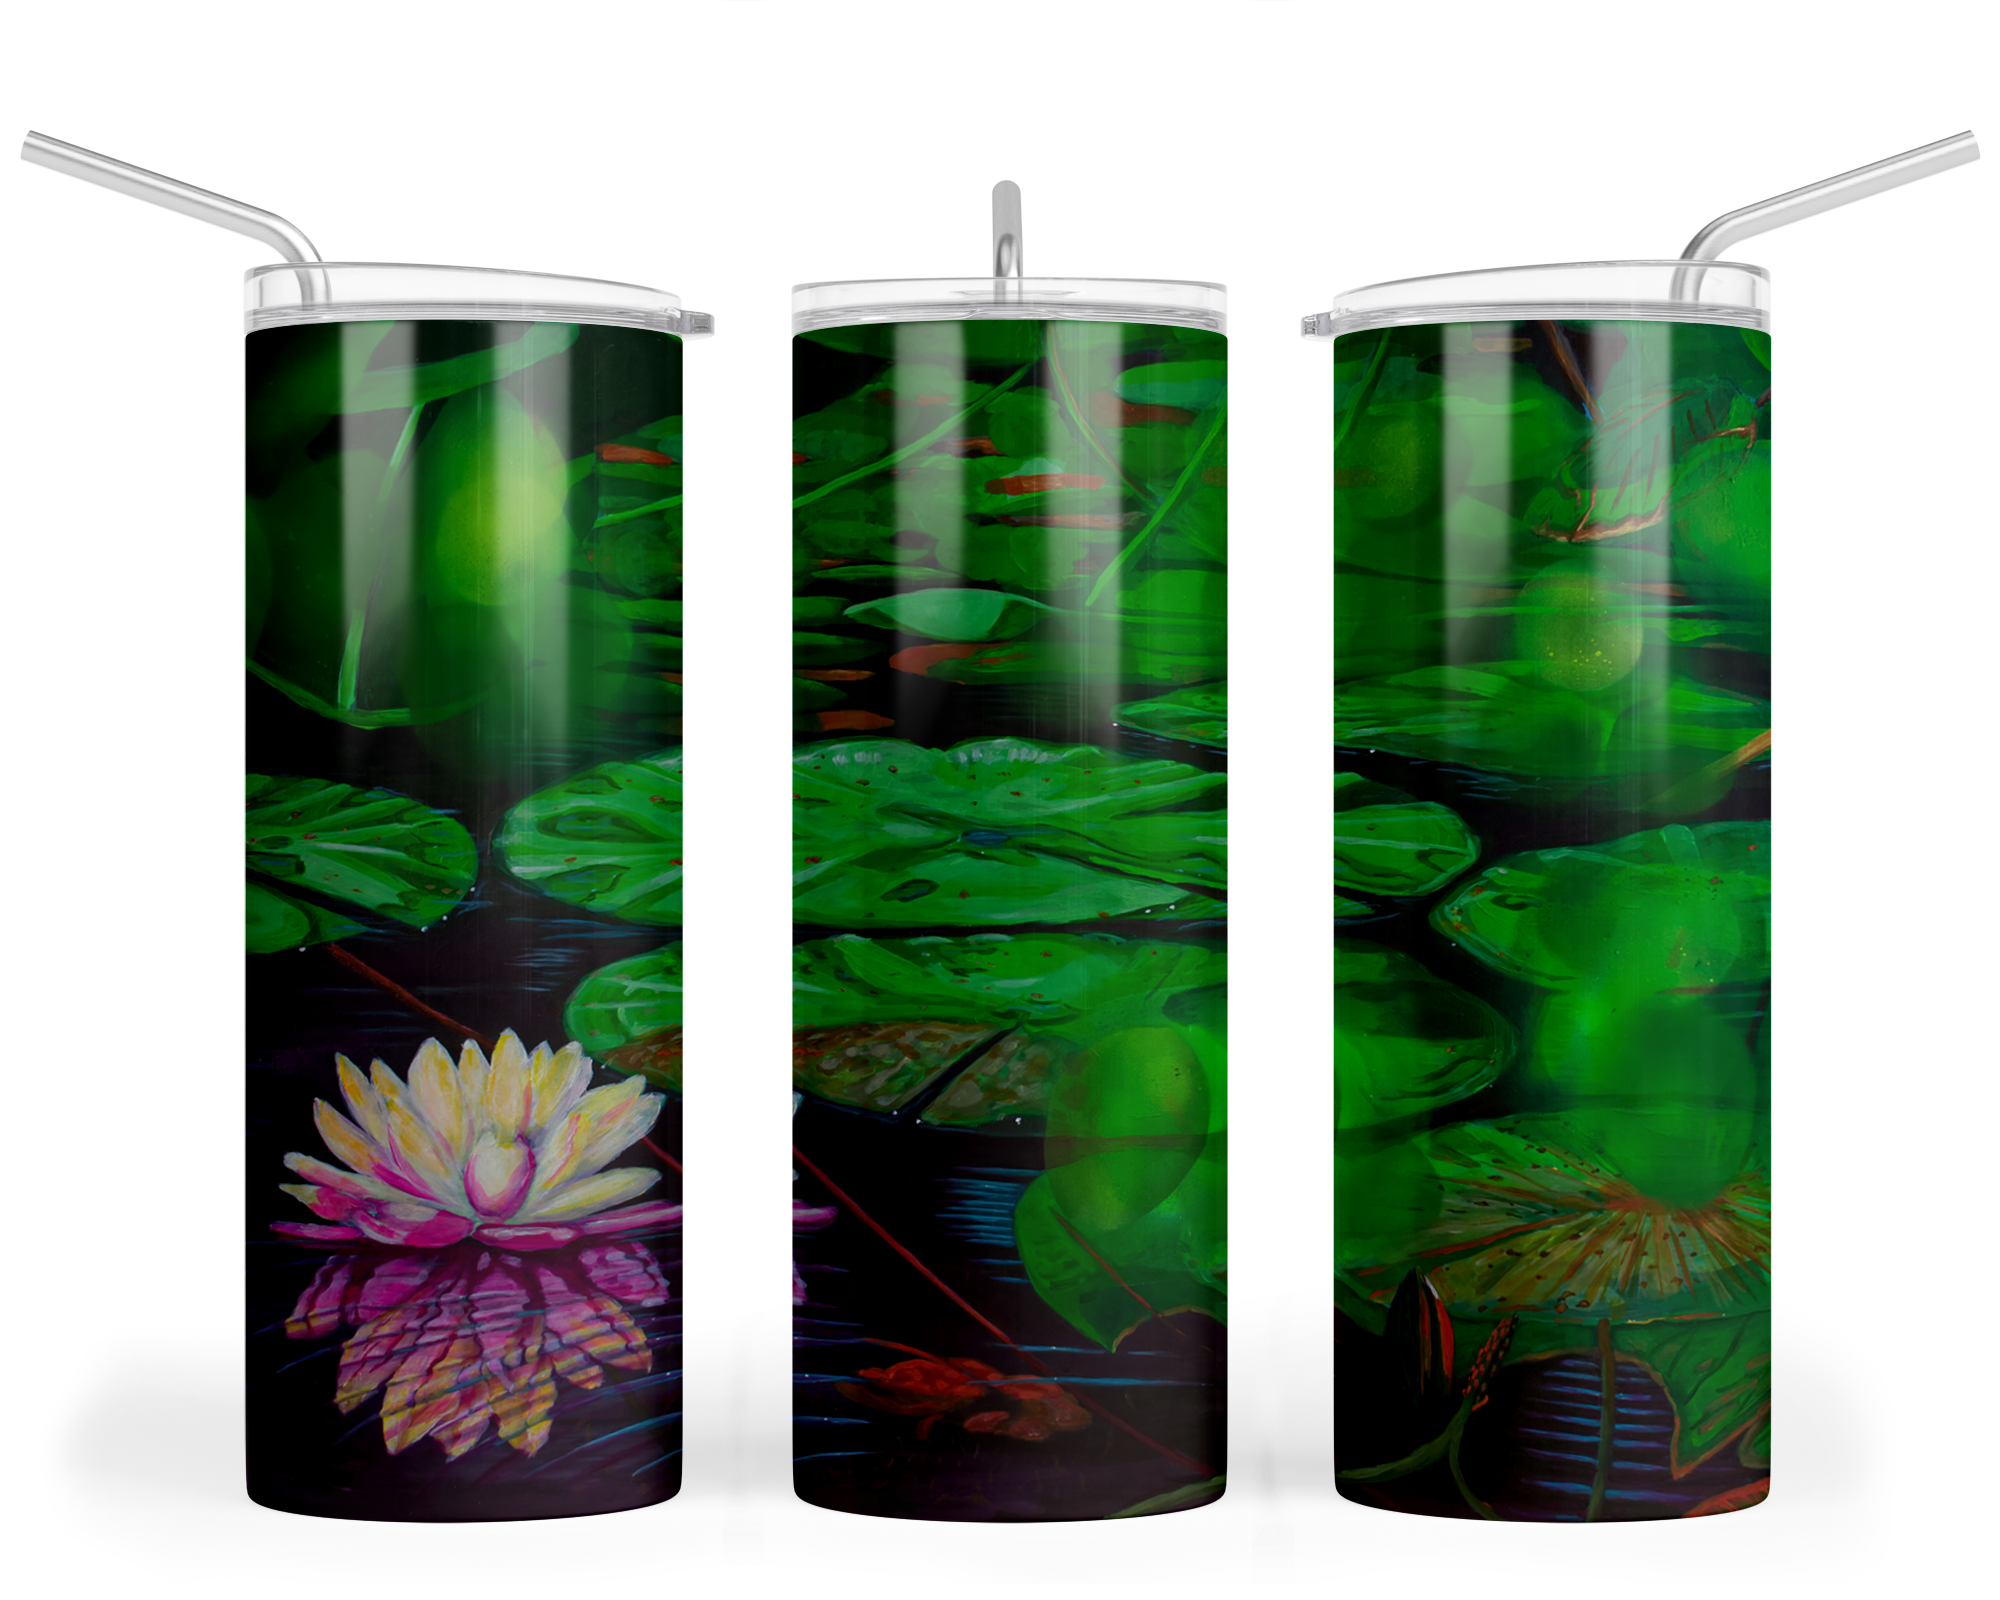 "Between and Betwixt the Leaves" - Stainless Steel Tumbler